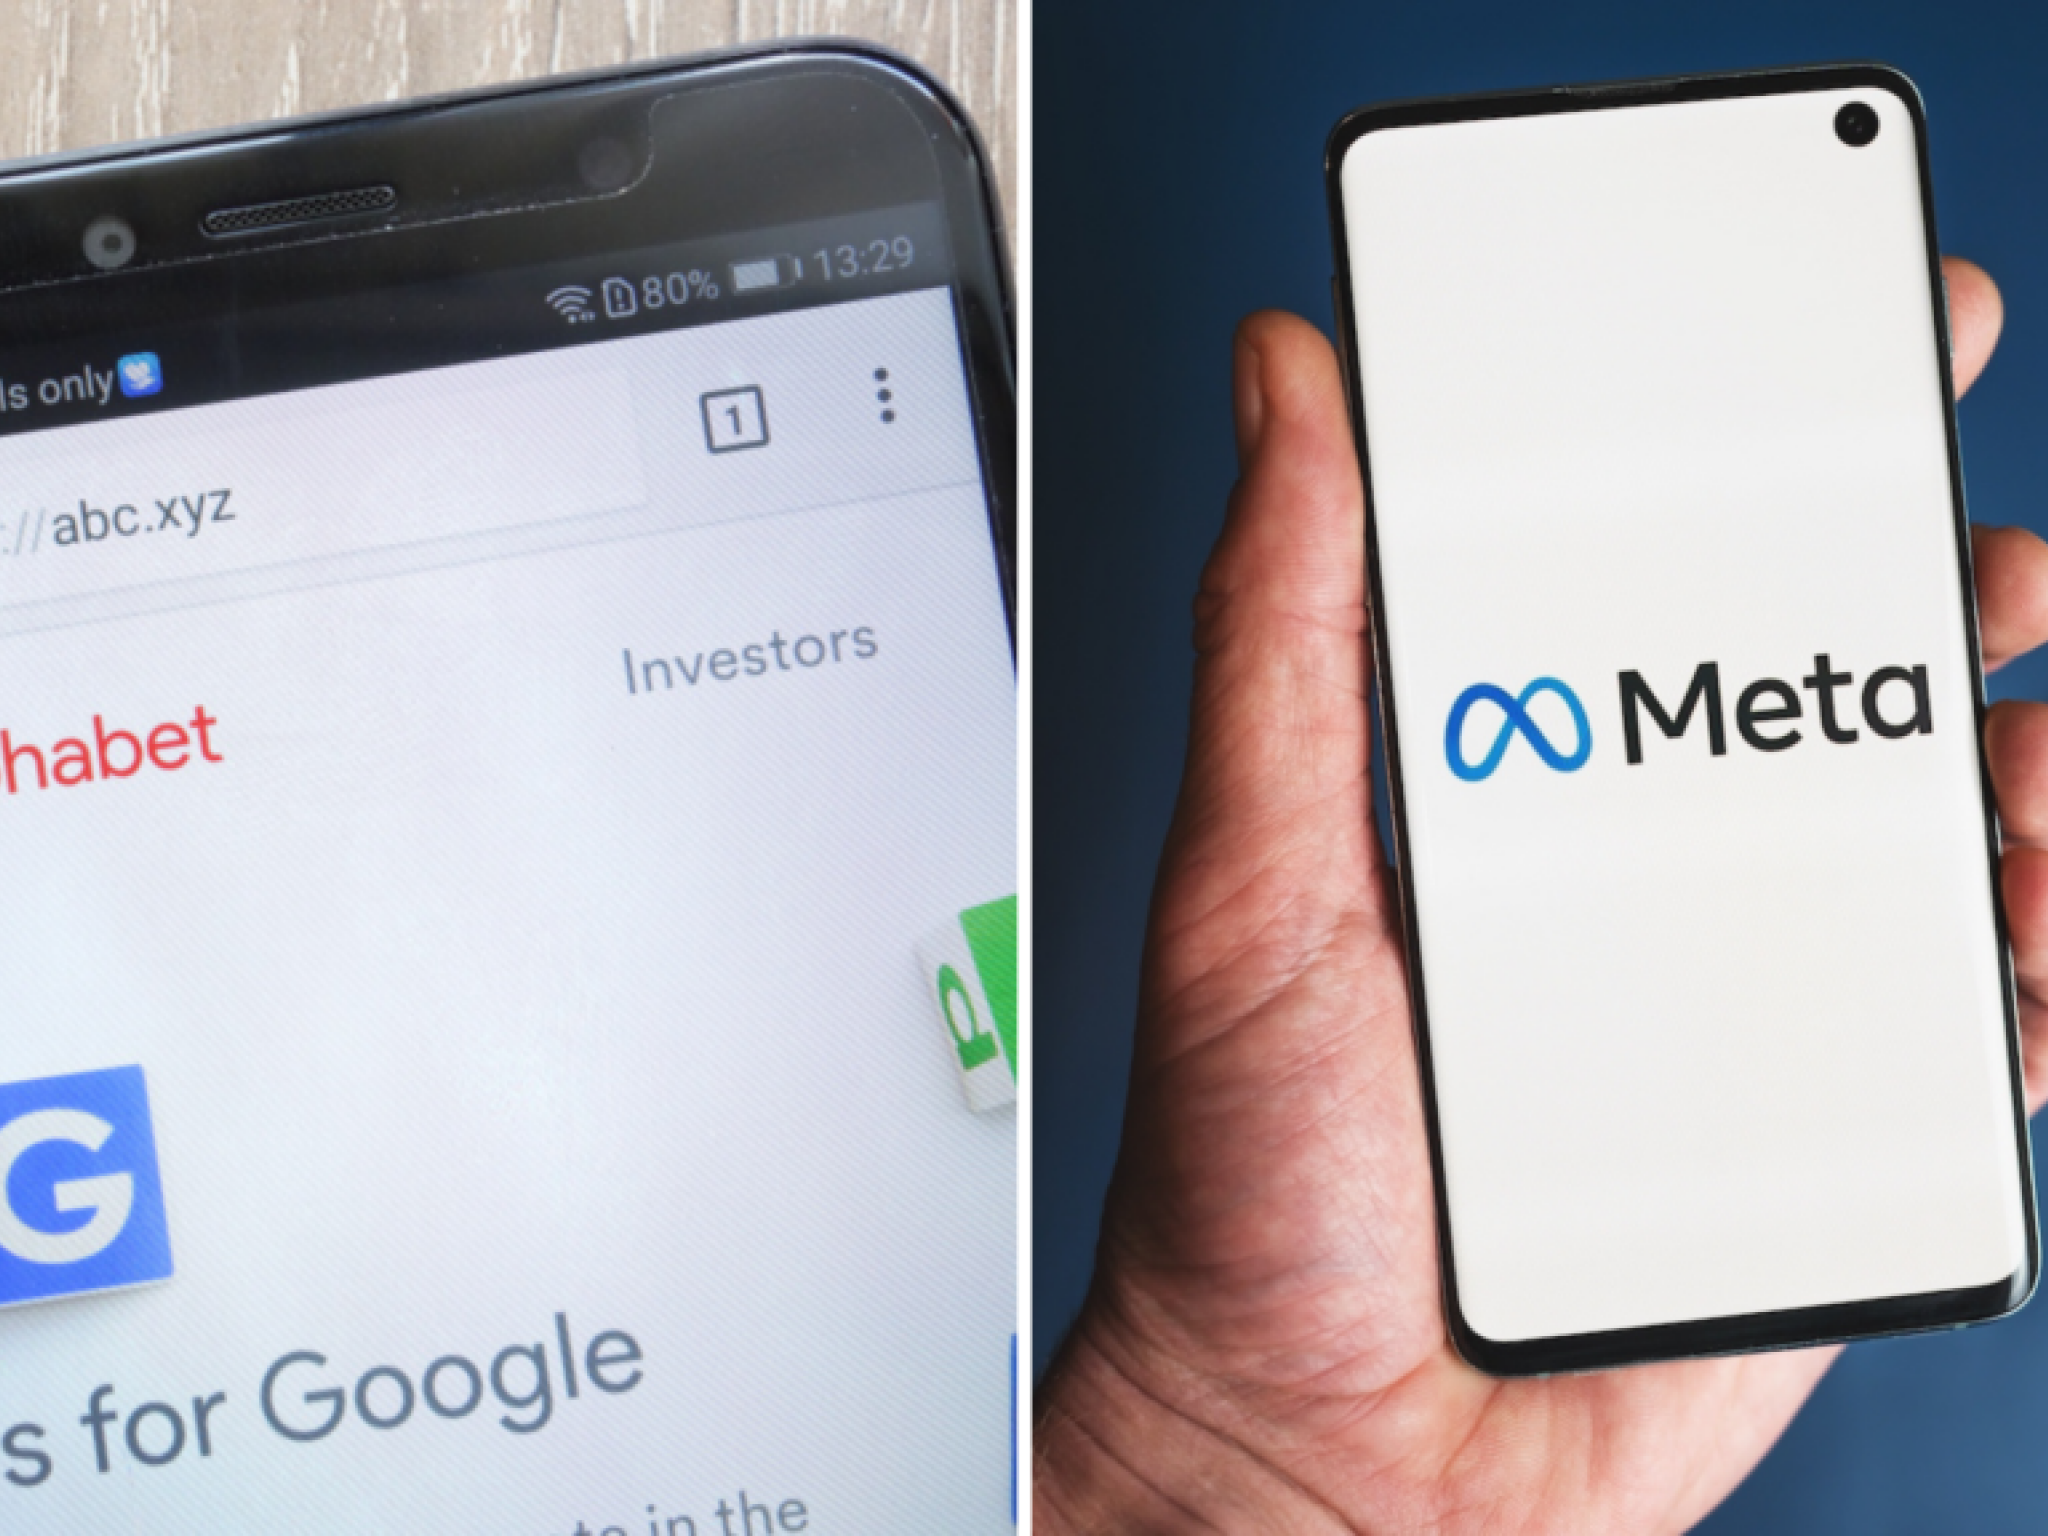  metas-ai-assistant-now-integrates-real-time-google-search-bing-results-expert-calls-it-the-smart-route 